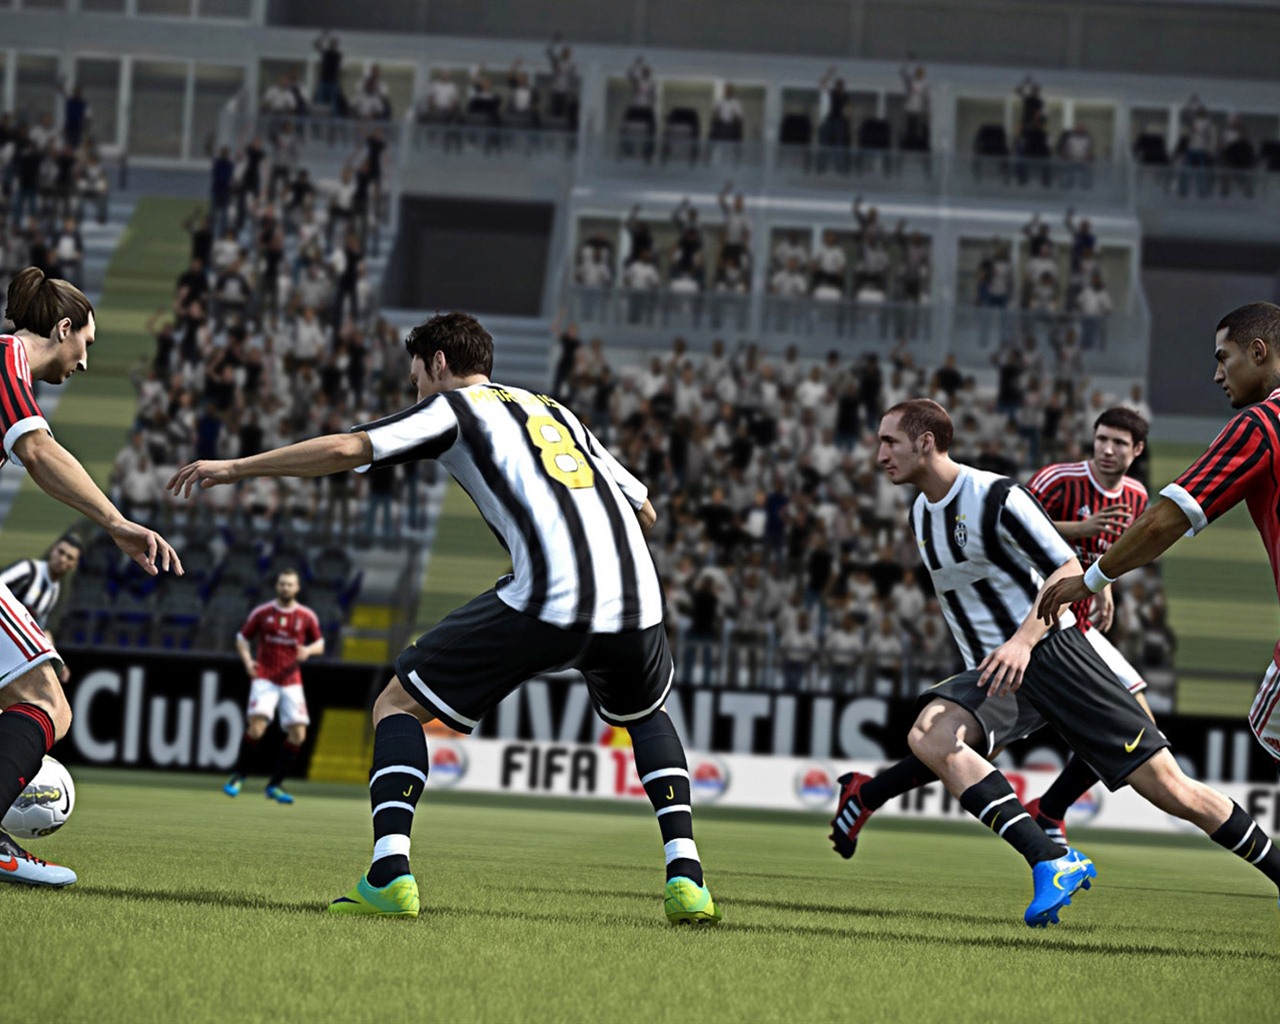 FIFA 13 game HD wallpapers #19 - 1280x1024